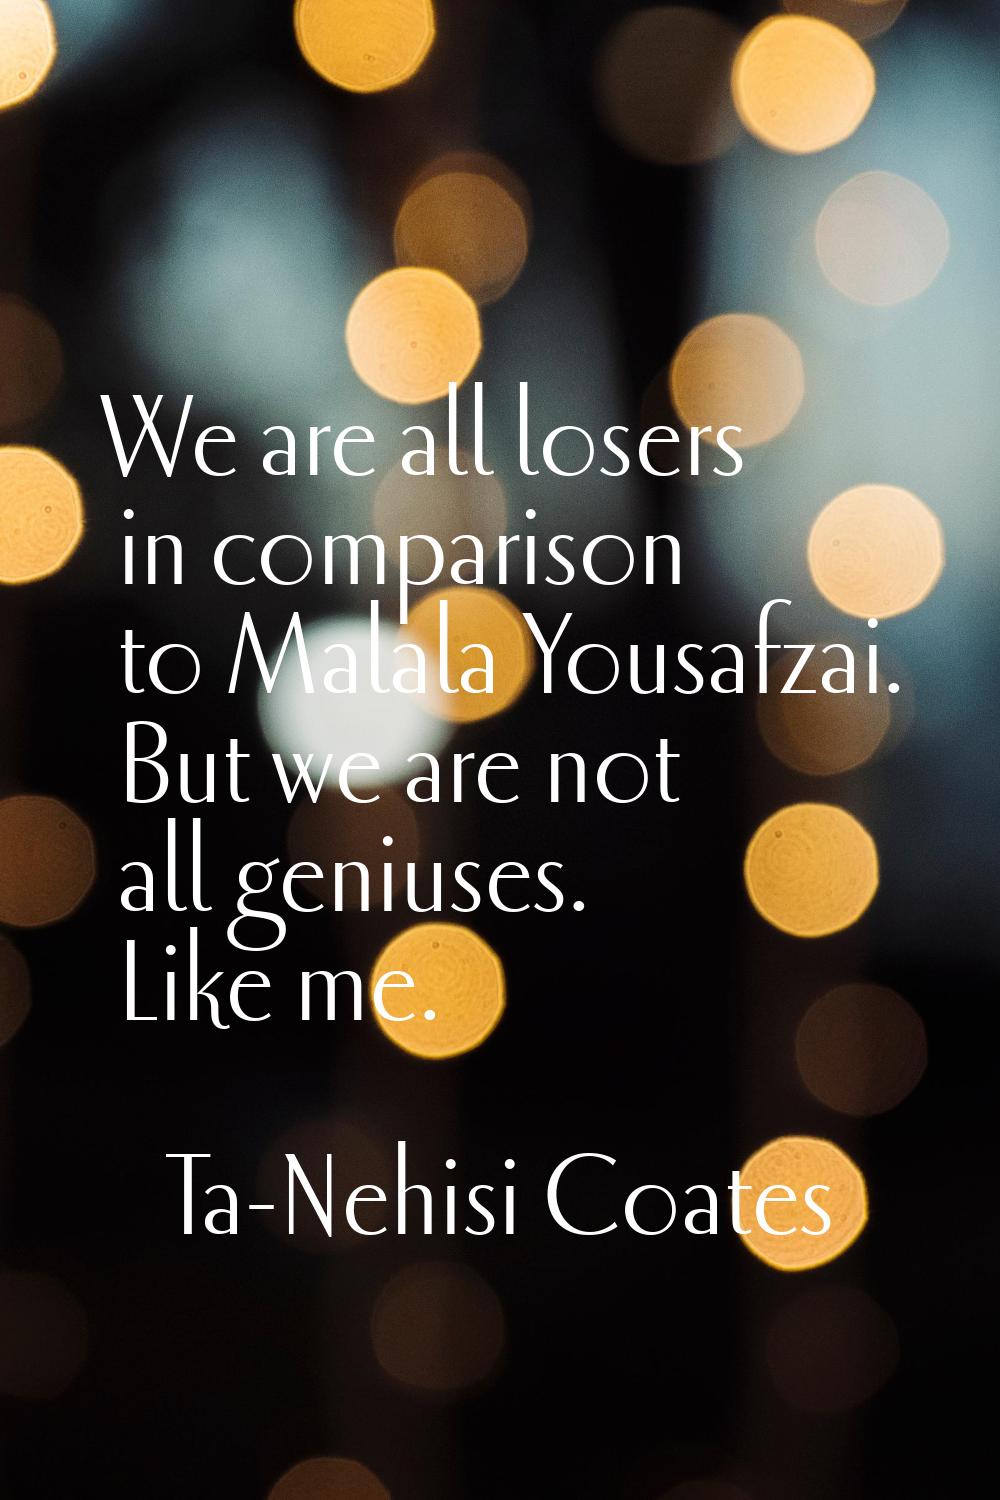 We are all losers in comparison to Malala Yousafzai. But we are not all geniuses. Like me.